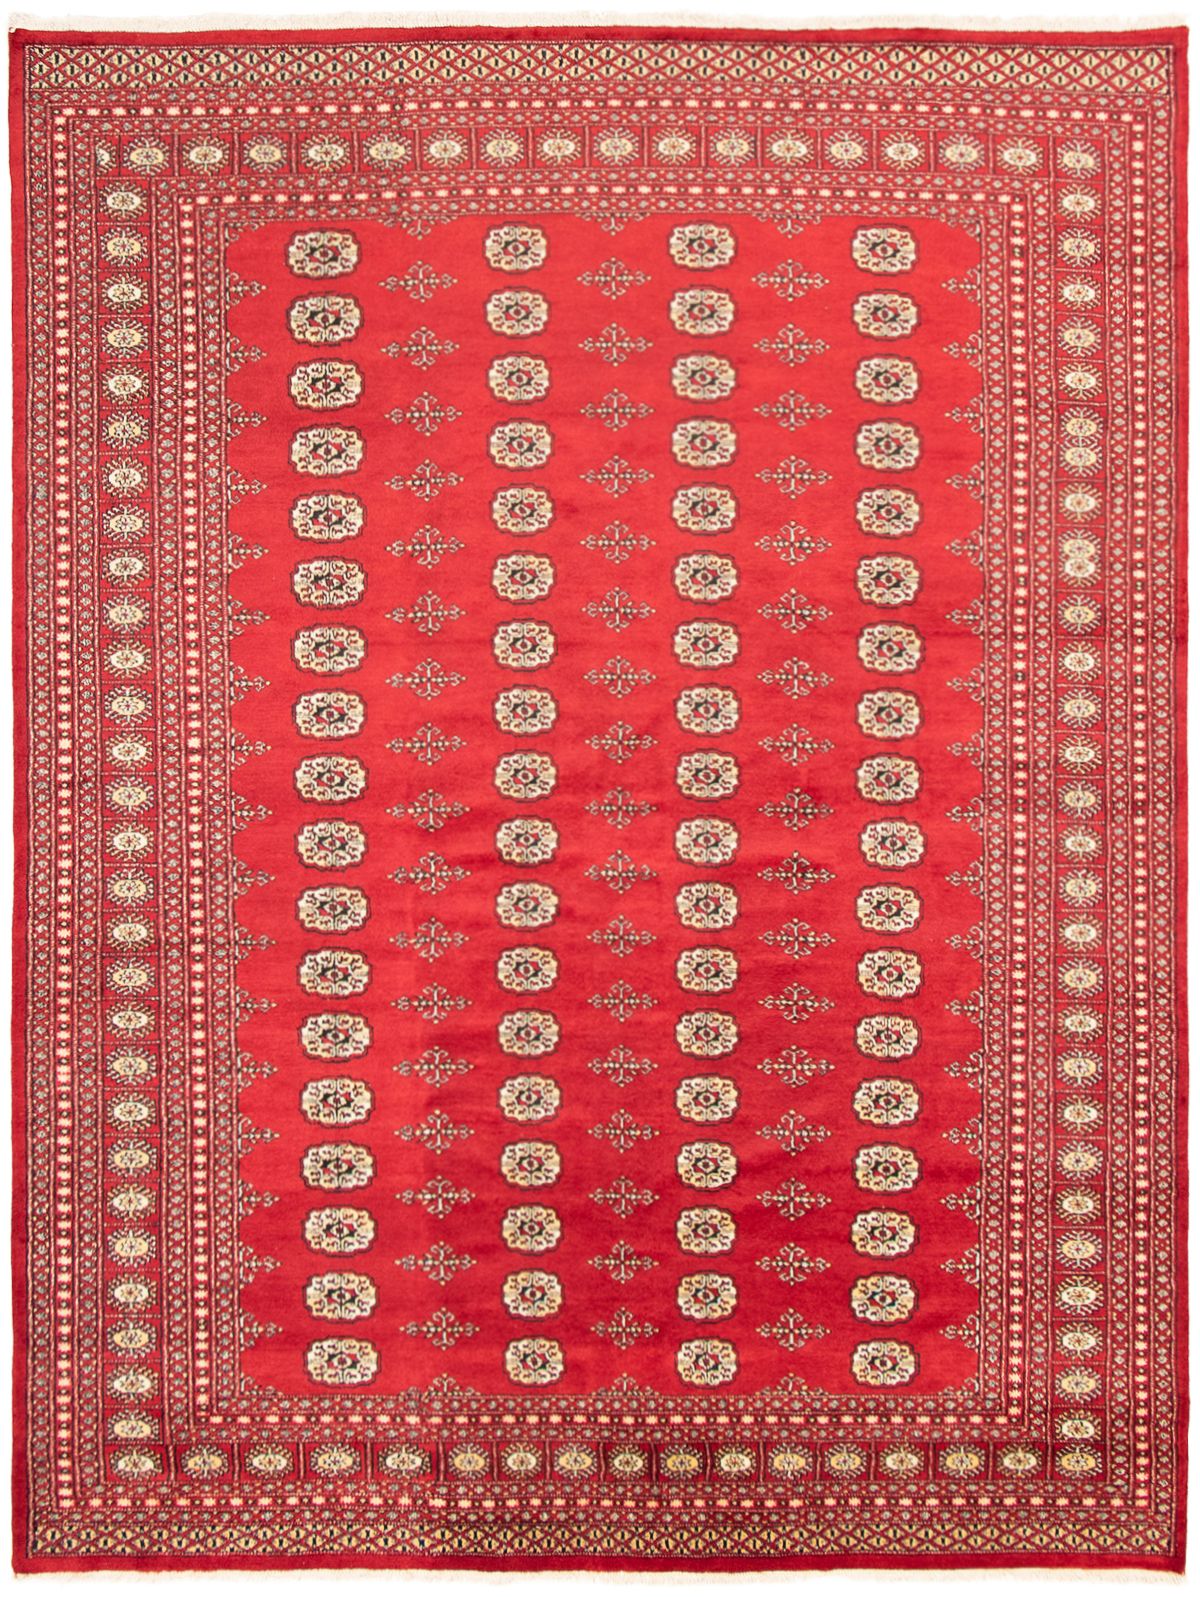 Hand-knotted Finest Peshawar Bokhara Red Wool Rug 8'0" x 10'5" Size: 8'0" x 10'5"  